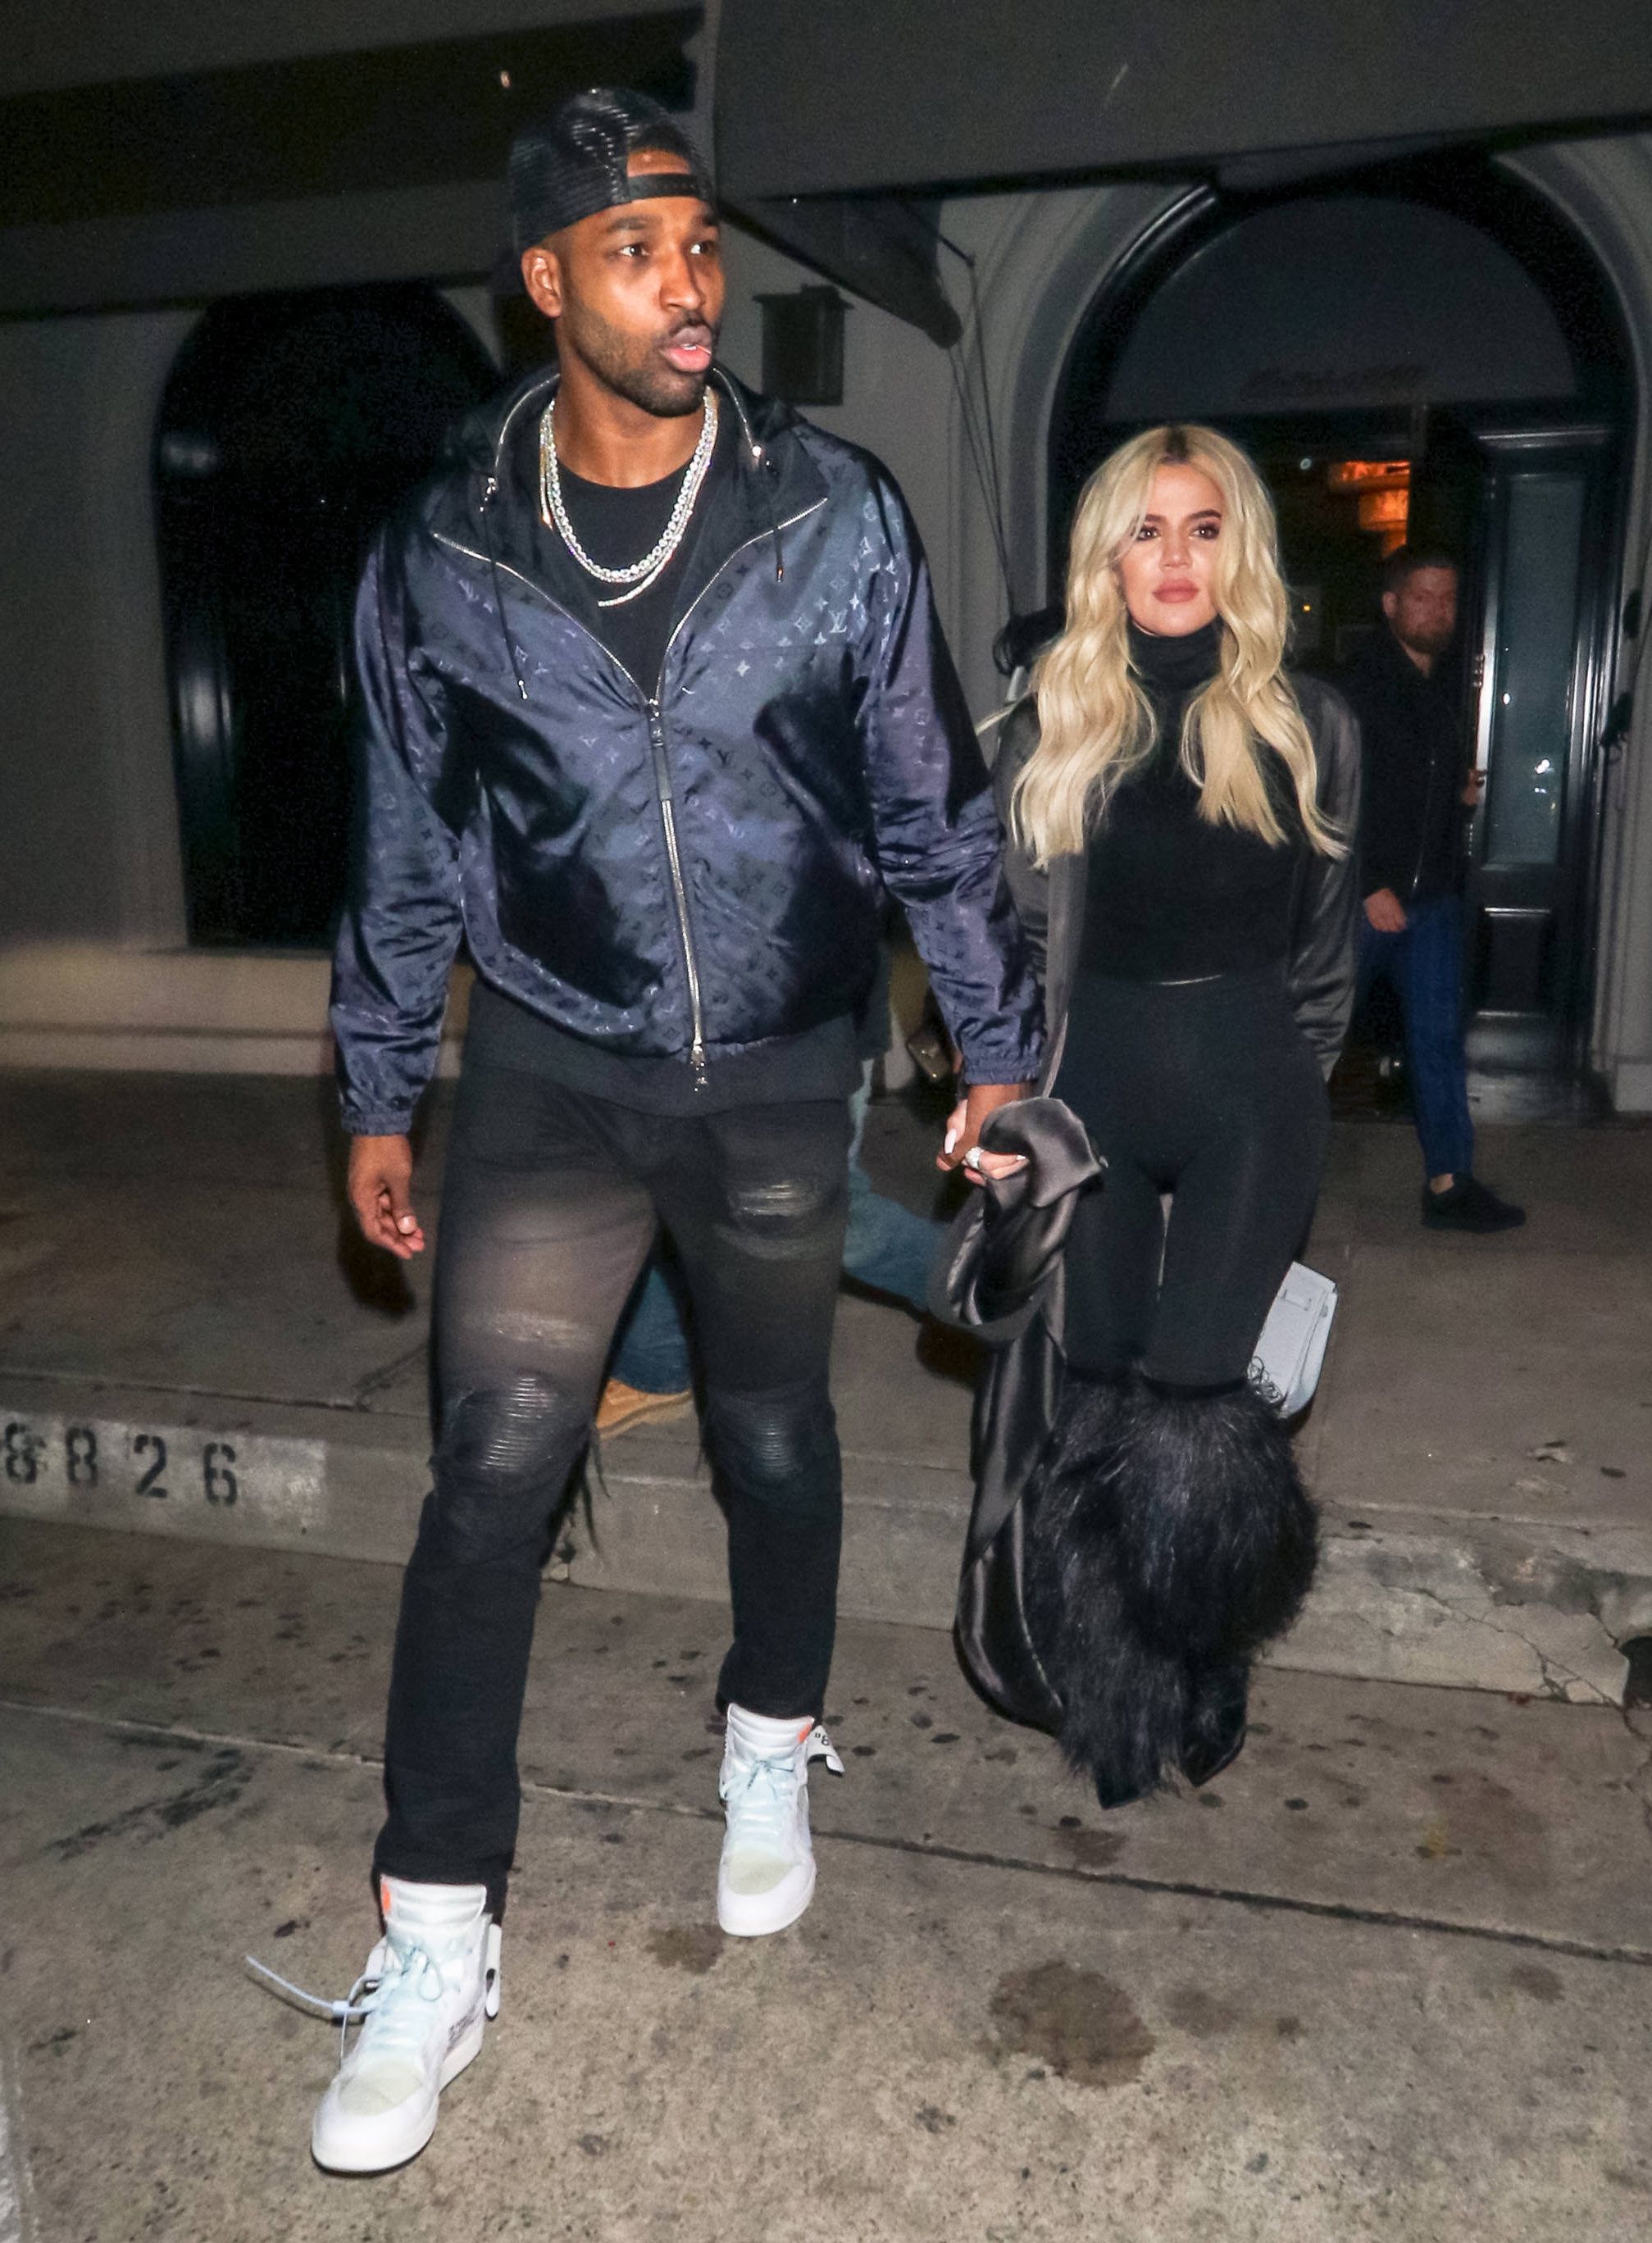 <p>Nearly a year later, Tristan Thompson <a href="https://www.wonderwall.com/news/khloe-kardashian-and-tristan-thompson-split-after-alleged-infidelity-again-3018509.article">cheated... AGAIN</a>. Hollywood Unlocked was the first to report that on Feb. 17, 2019, the NBA star was seen at a Los Angeles house party hooking up with model Jordyn Woods -- the longtime best friend of <a href="https://www.wonderwall.com/celebrity/profiles/overview/khloe-kardashian-622.article">Khloe Kardashian</a>'s little sister <a href="https://www.wonderwall.com/celebrity/profiles/overview/kylie-jenner-1413.article">Kylie Jenner</a>. TMZ further reported on Feb. 19 that the athlete and Jordyn "were all over each other" and "making out," which finally led Khloe to dump Tristan, who tweeted then deleted the words "FAKE NEWS" after the report emerged. But stories from multiple outlets that followed made it clear the news was anything but fake. On March 1, Jordyn appeared on "Red Table Talk" where <a href="https://www.wonderwall.com/celebrity/photos/icymi-celeb-news-feb-24-march-2-2019-ed-sheeran-secret-wedding-luke-perry-stroke-ryan-seacrest-single-more-3018607.gallery?photoId=1049057">she admitted that she and Tristan kissed</a> on the lips but insisted they did not make out and there was "no passion." She implied that Tristan initiated the kiss and said she was "no homewrecker." She also said, "I know I'm not the reason Khloe and Tristan broke up." Well, Khloe didn't see it the same way, tweeting the same day, "Why are you lying @jordynwoods?? If you're going to try and save yourself by going public, INSTEAD OF CALLING ME PRIVATELY TO APOLOGIZE FIRST, at least be HONEST about your story. BTW, You ARE the reason my family broke up!" Khloe and Tristan reconciled in 2020, only to split in 2021 after she learned he'd fathered a son with another woman.</p>